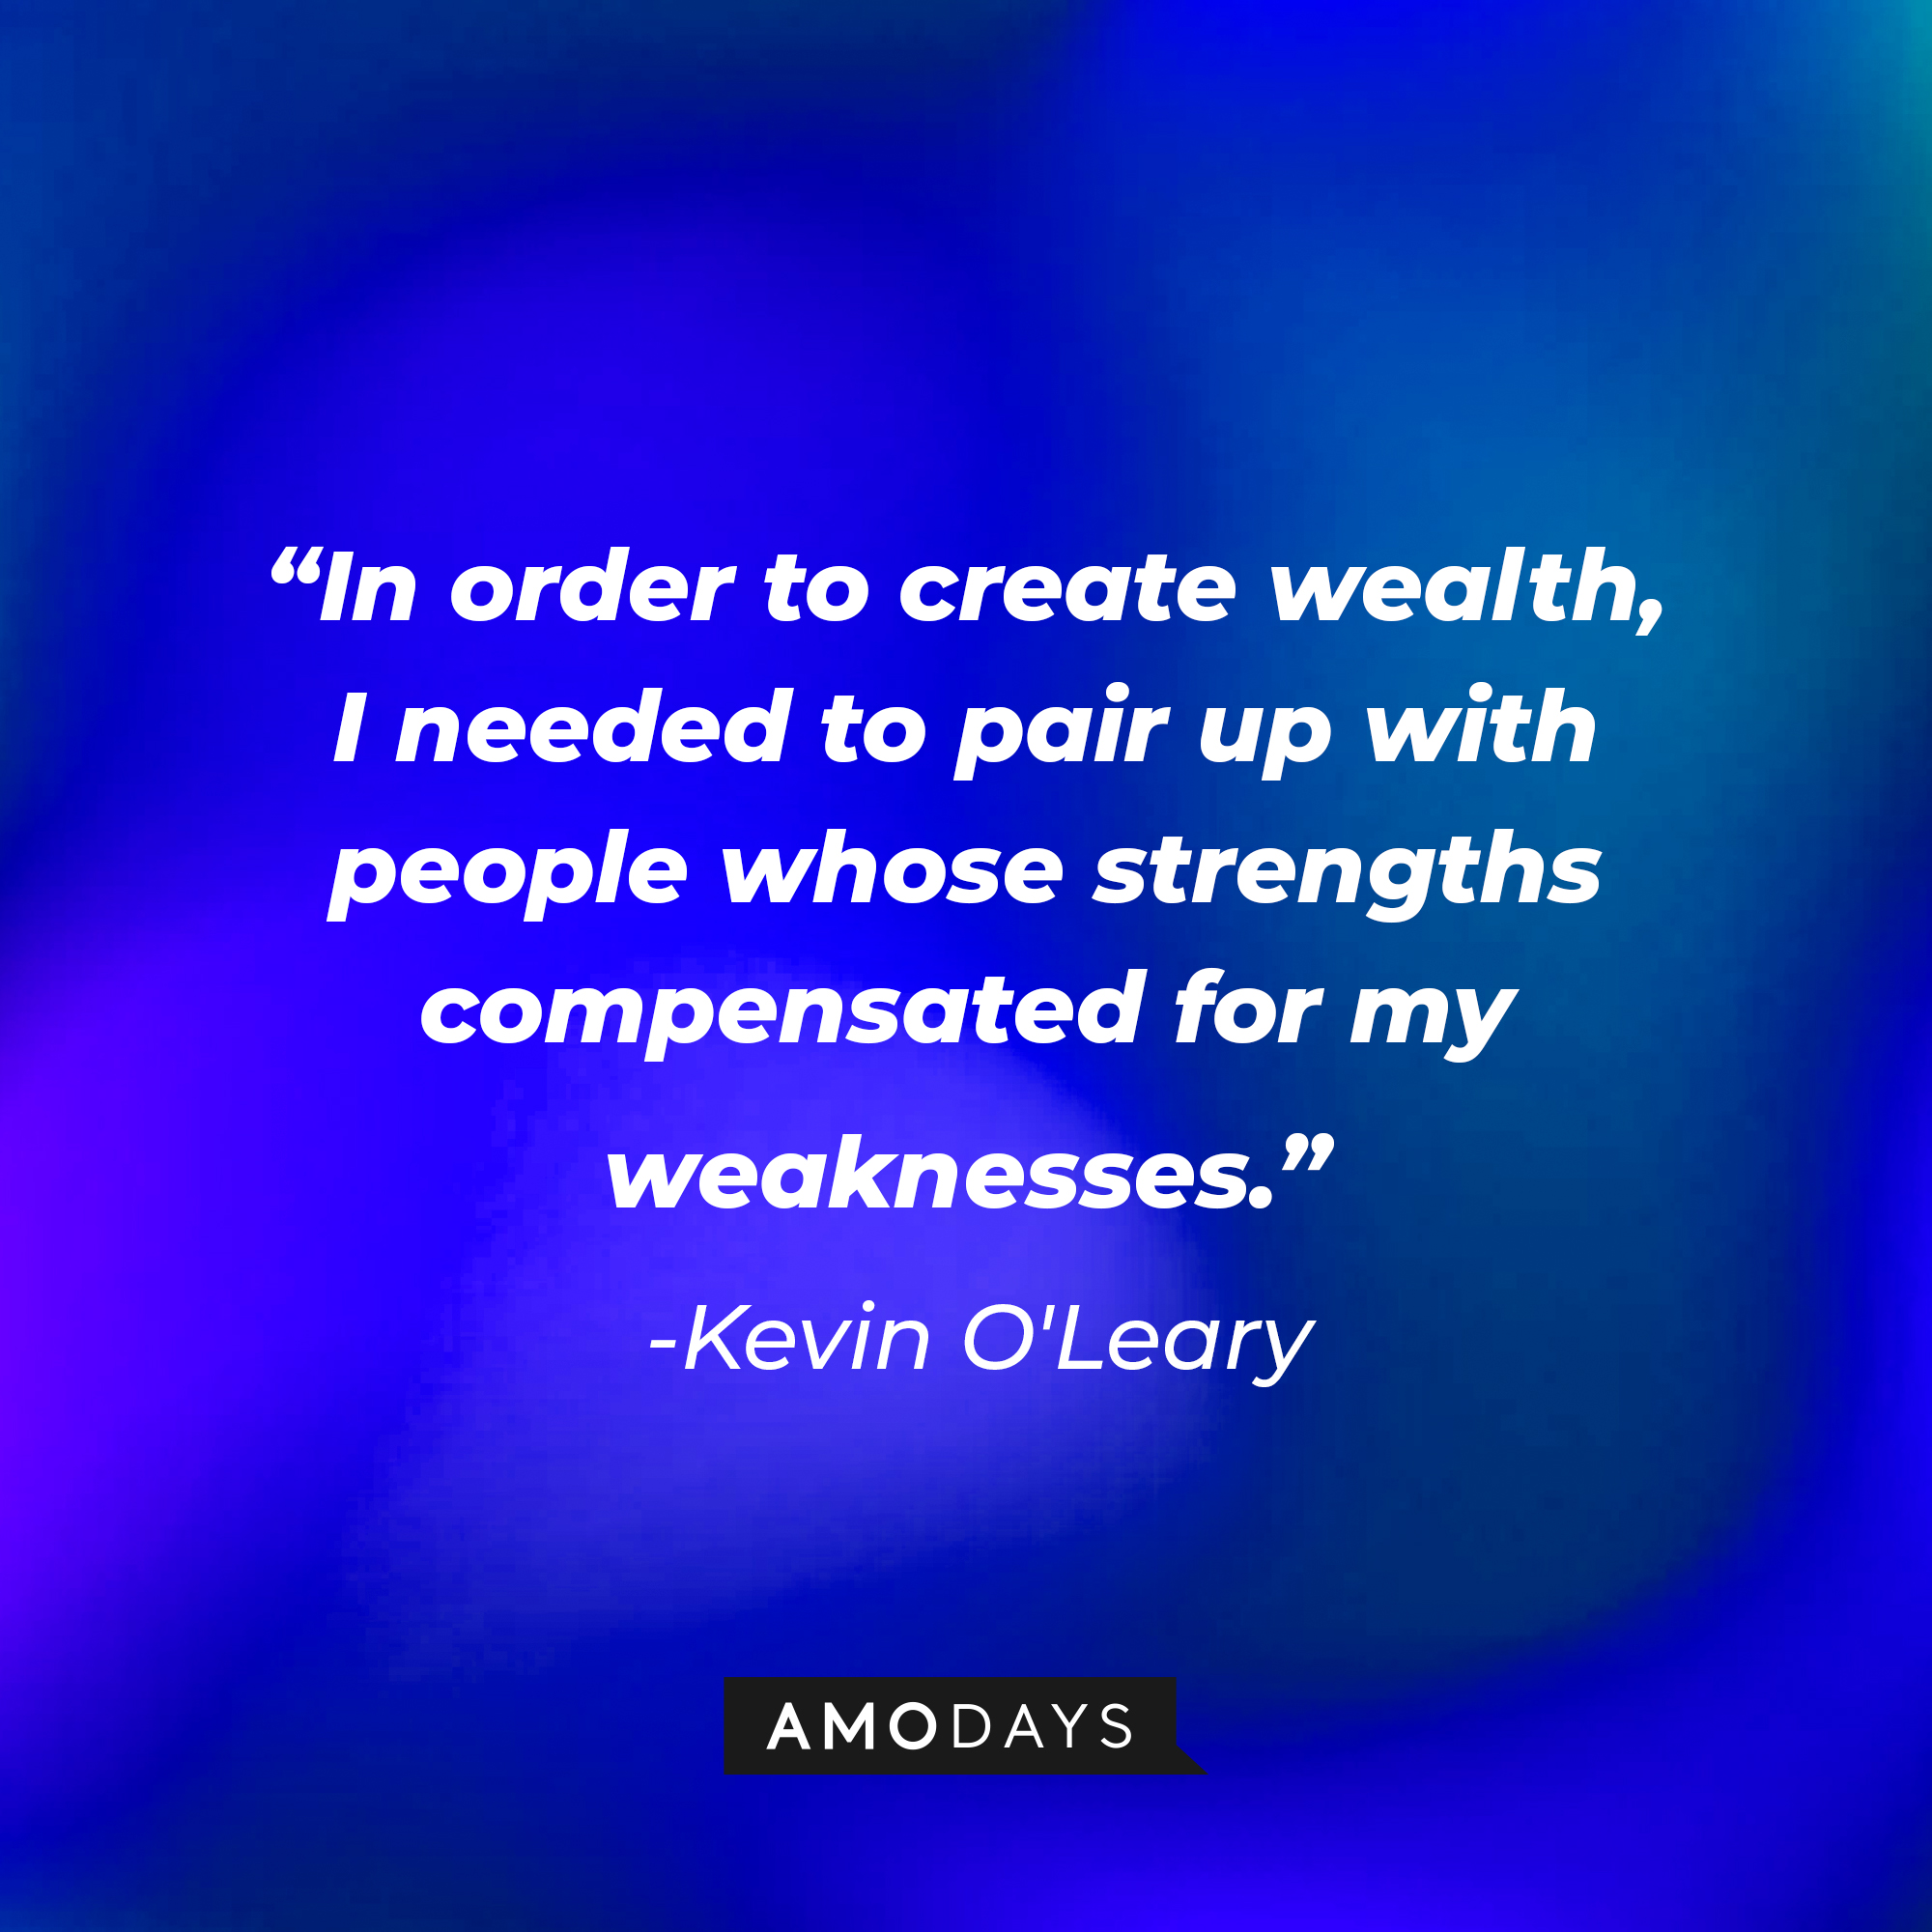 A photo with Kevin O'Leary's quote, "In order to create wealth, I needed to pair up with people whose strengths compensated for my weaknesses." | Source: Amodays